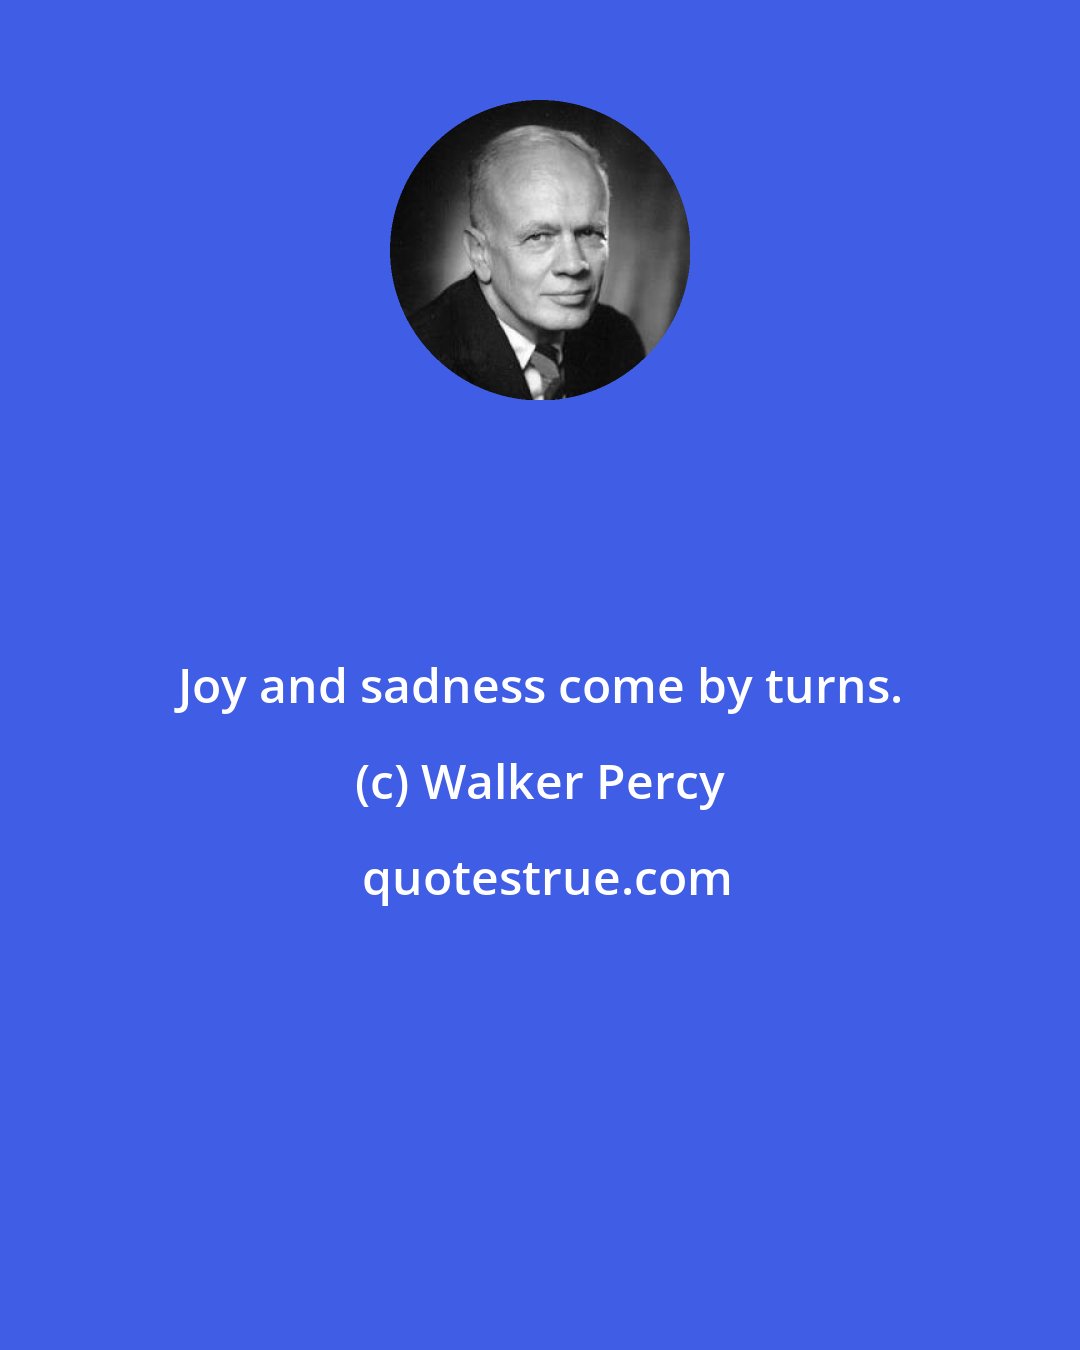 Walker Percy: Joy and sadness come by turns.